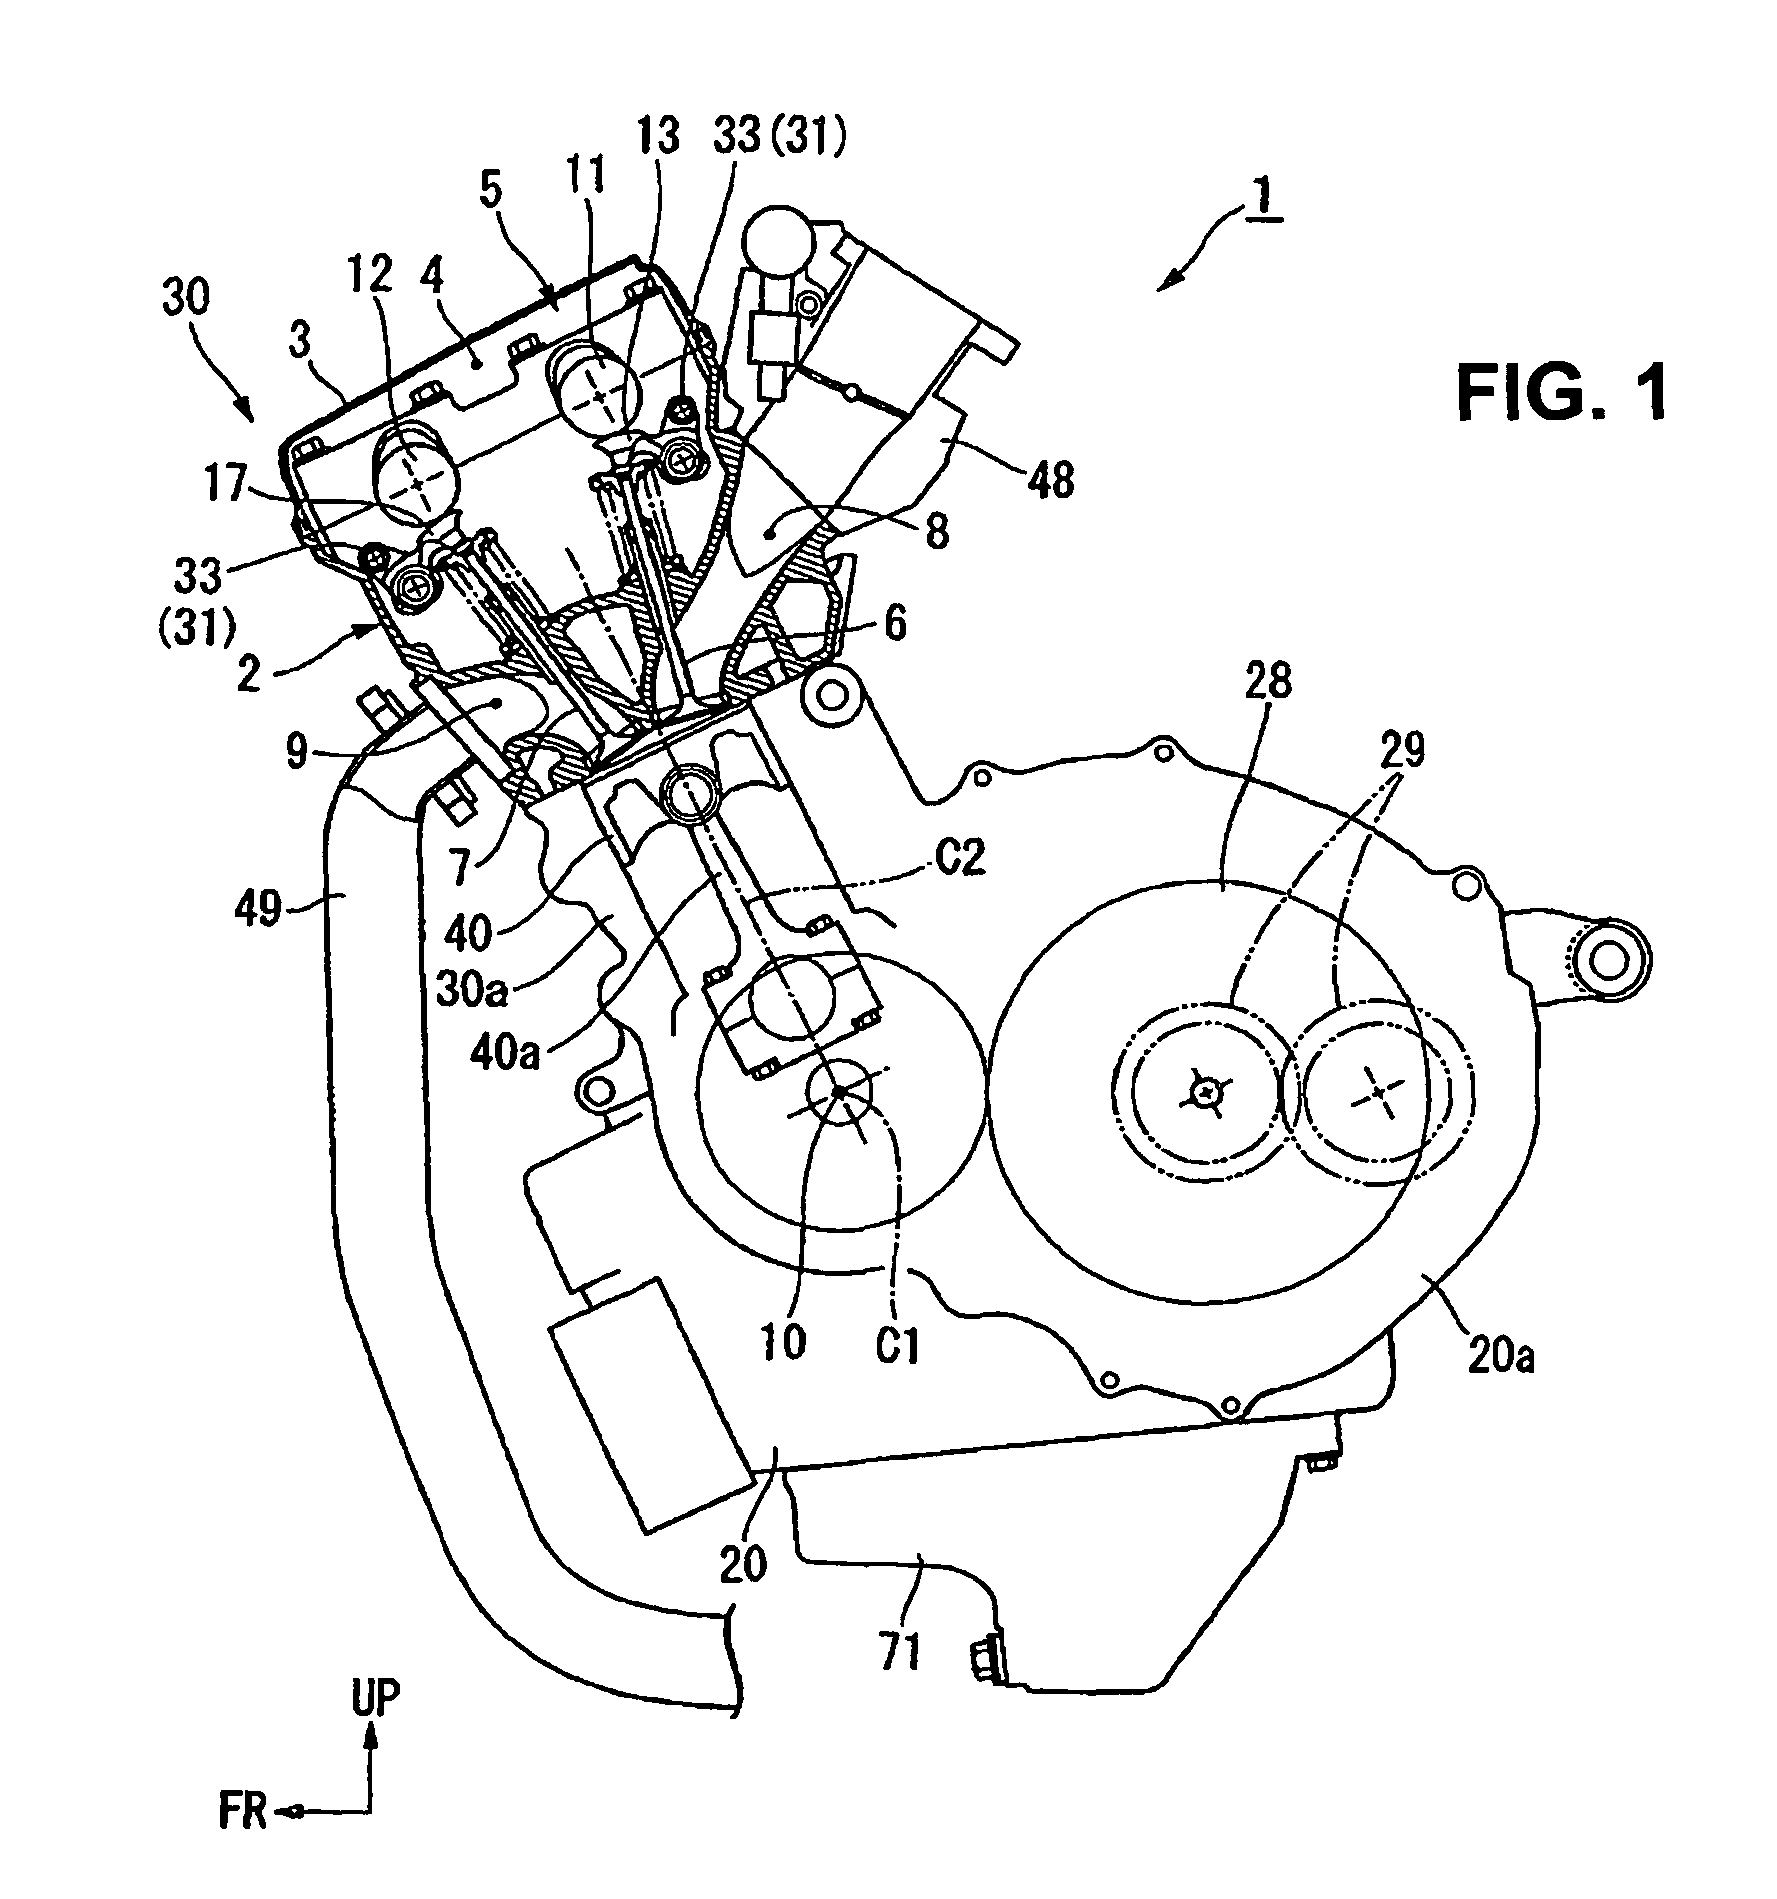 Internal combustion engine having a hydraulically-actuated variable valve control system, and motorcycle incorporating same